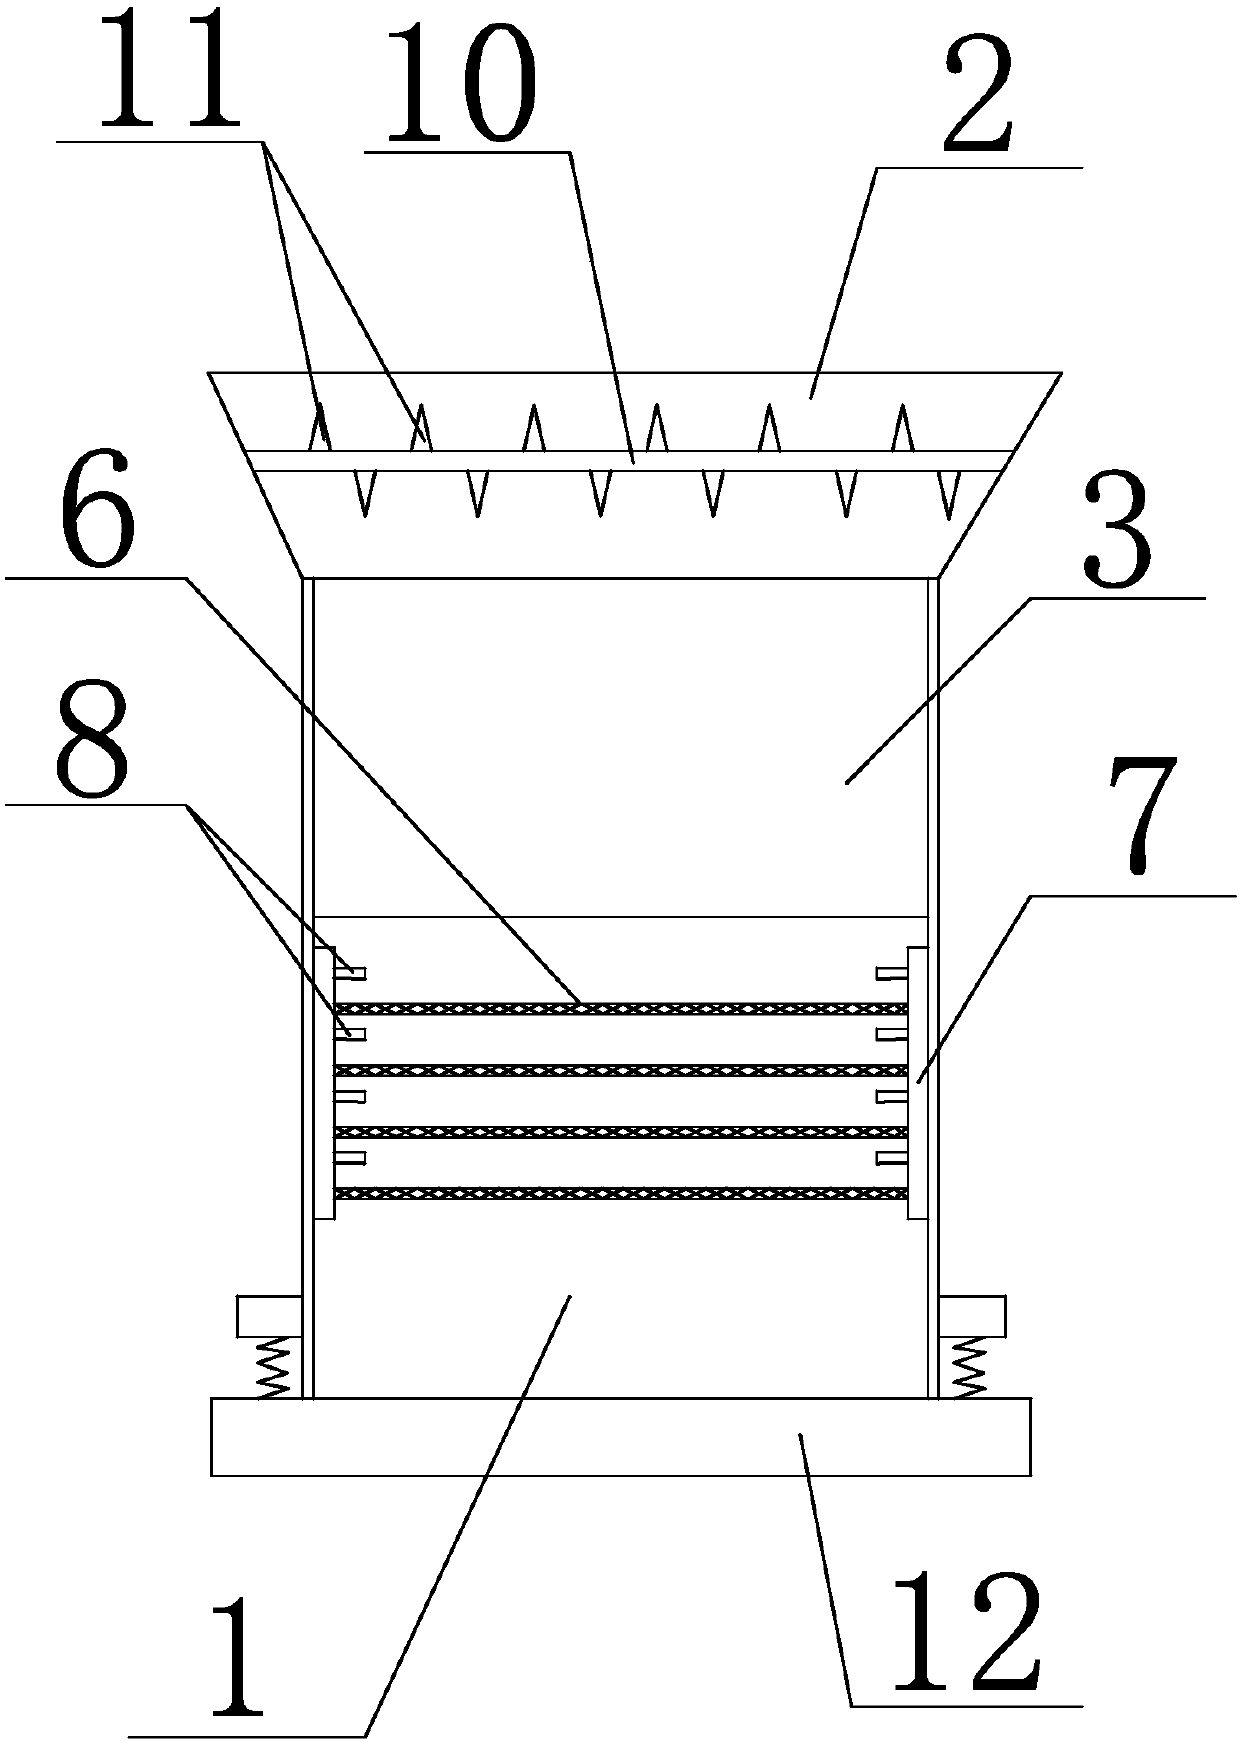 Soil conditioner drying device with sterilization function